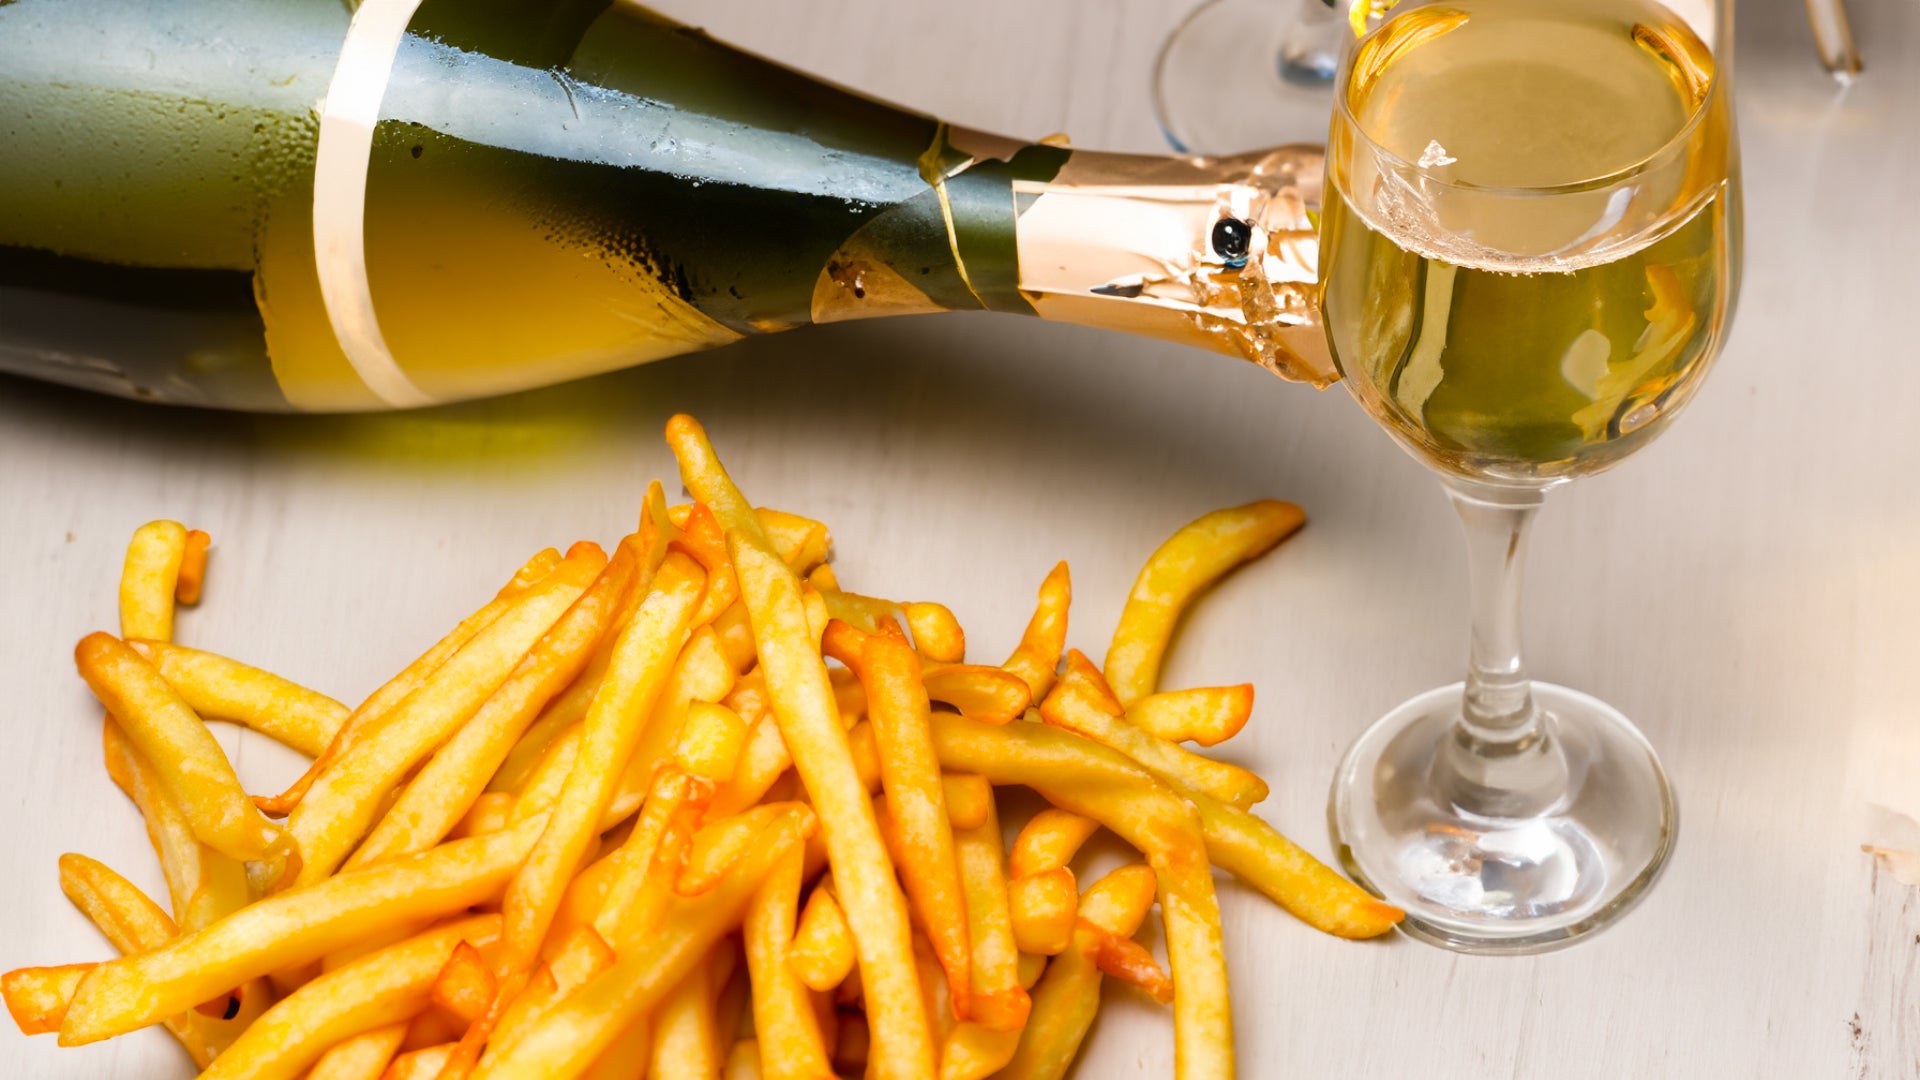 7 Unconventional Wine & Food Pairings that Surprise You